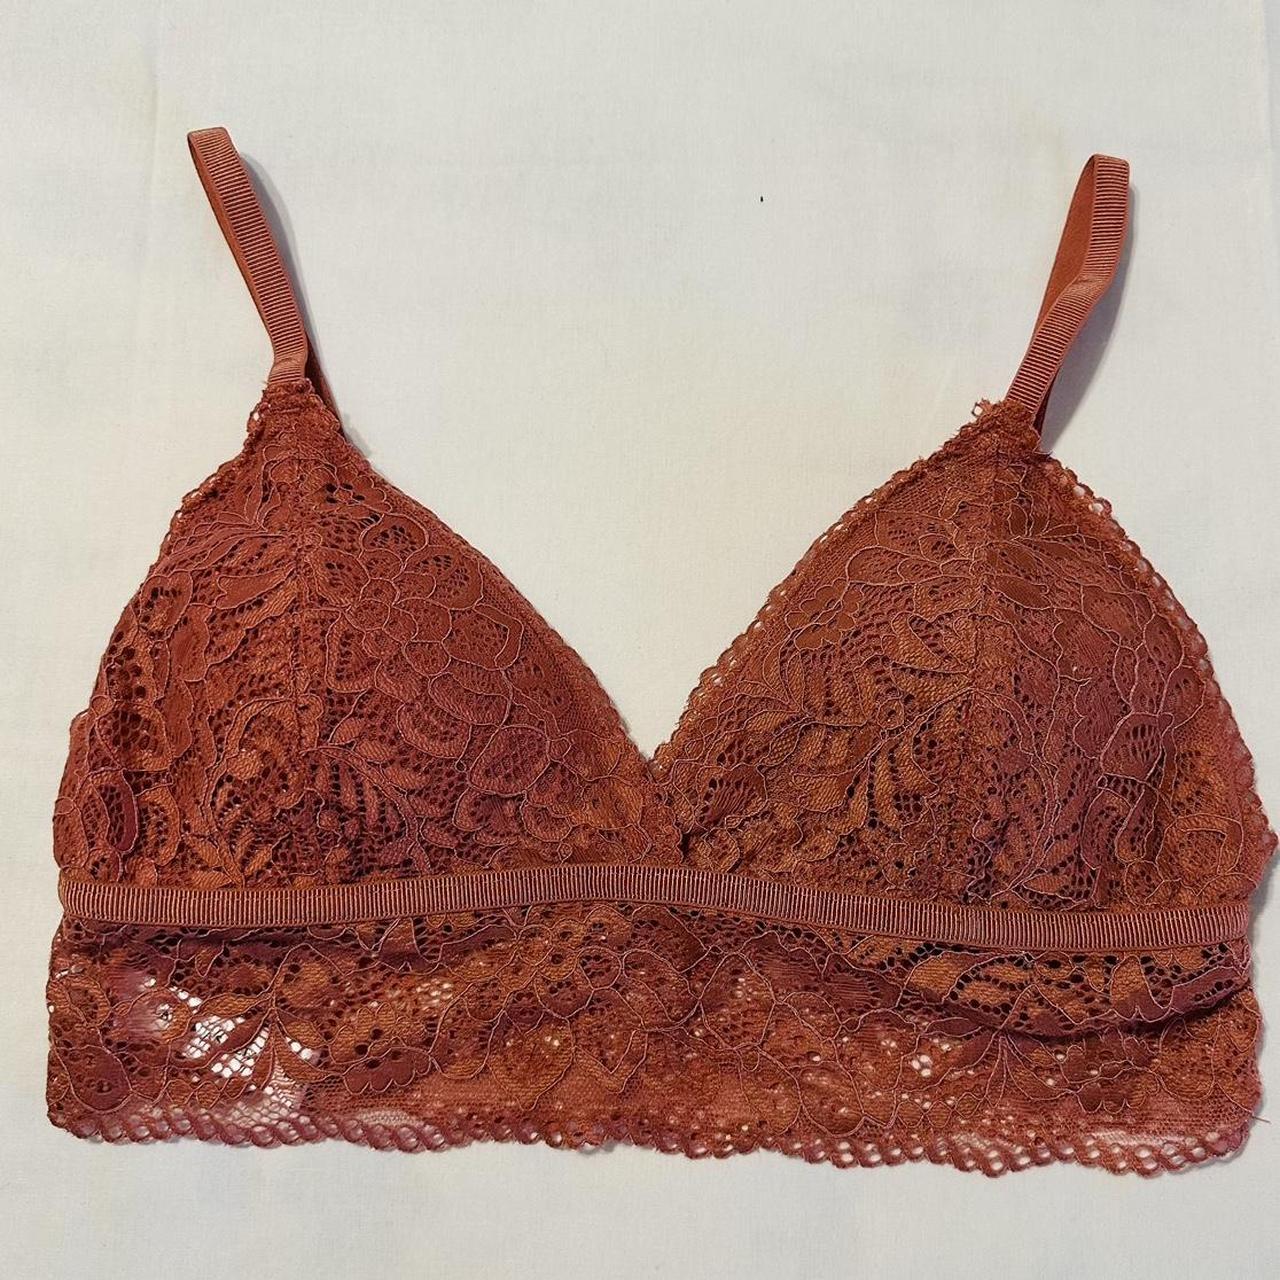 Buy Lace Bra from the Laura Ashley online shop